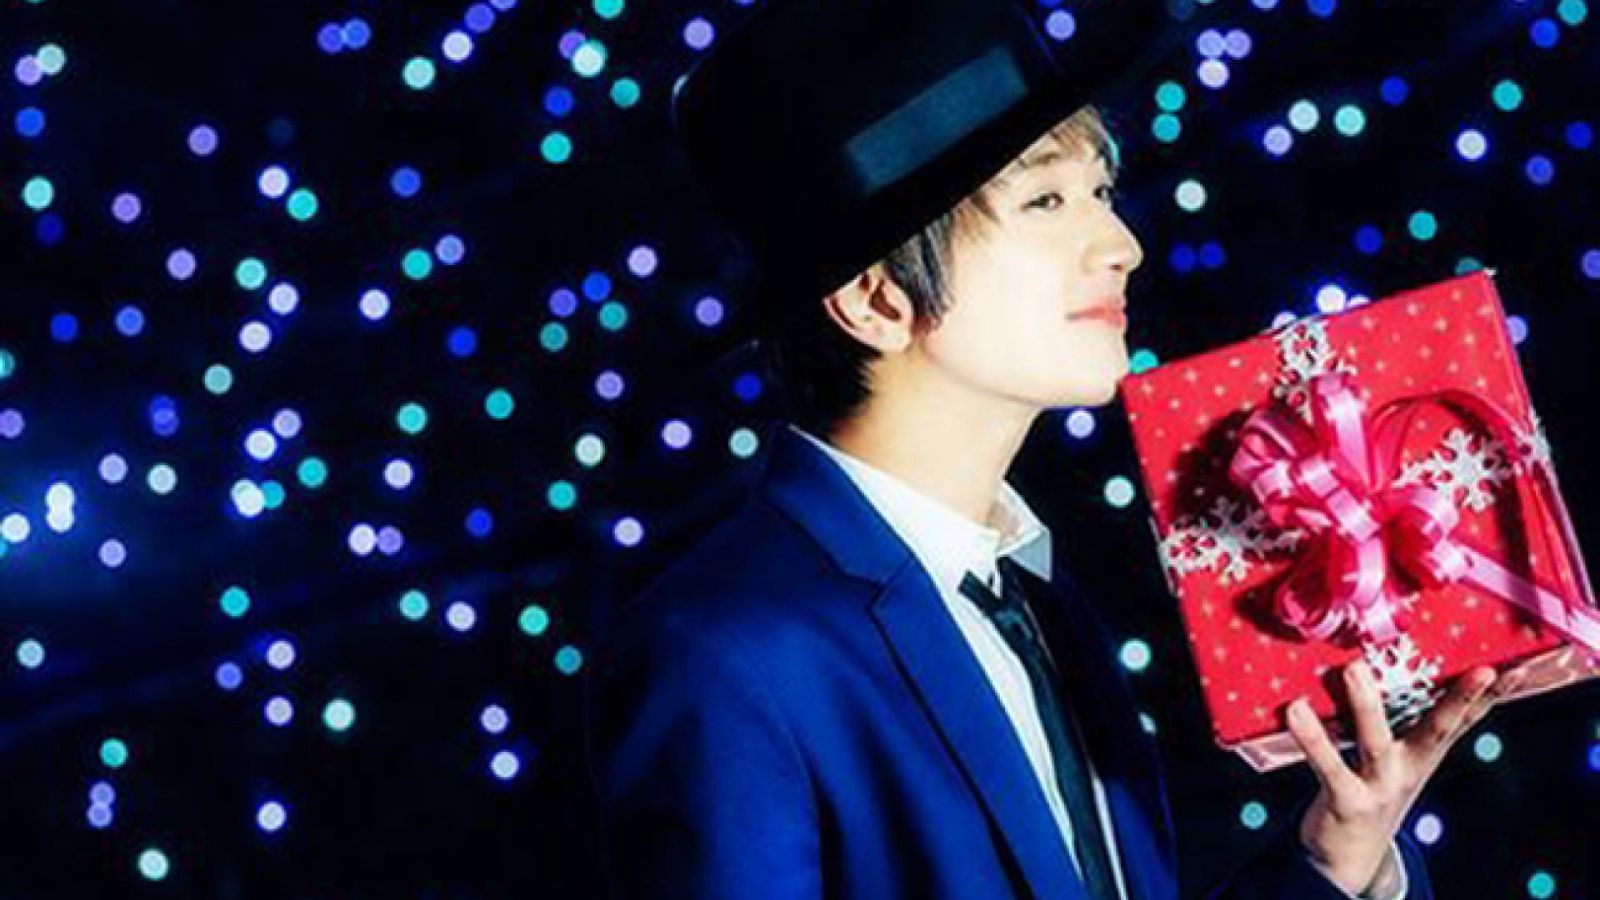 First Solo Album from Nissy © avex management. All rights reserved.